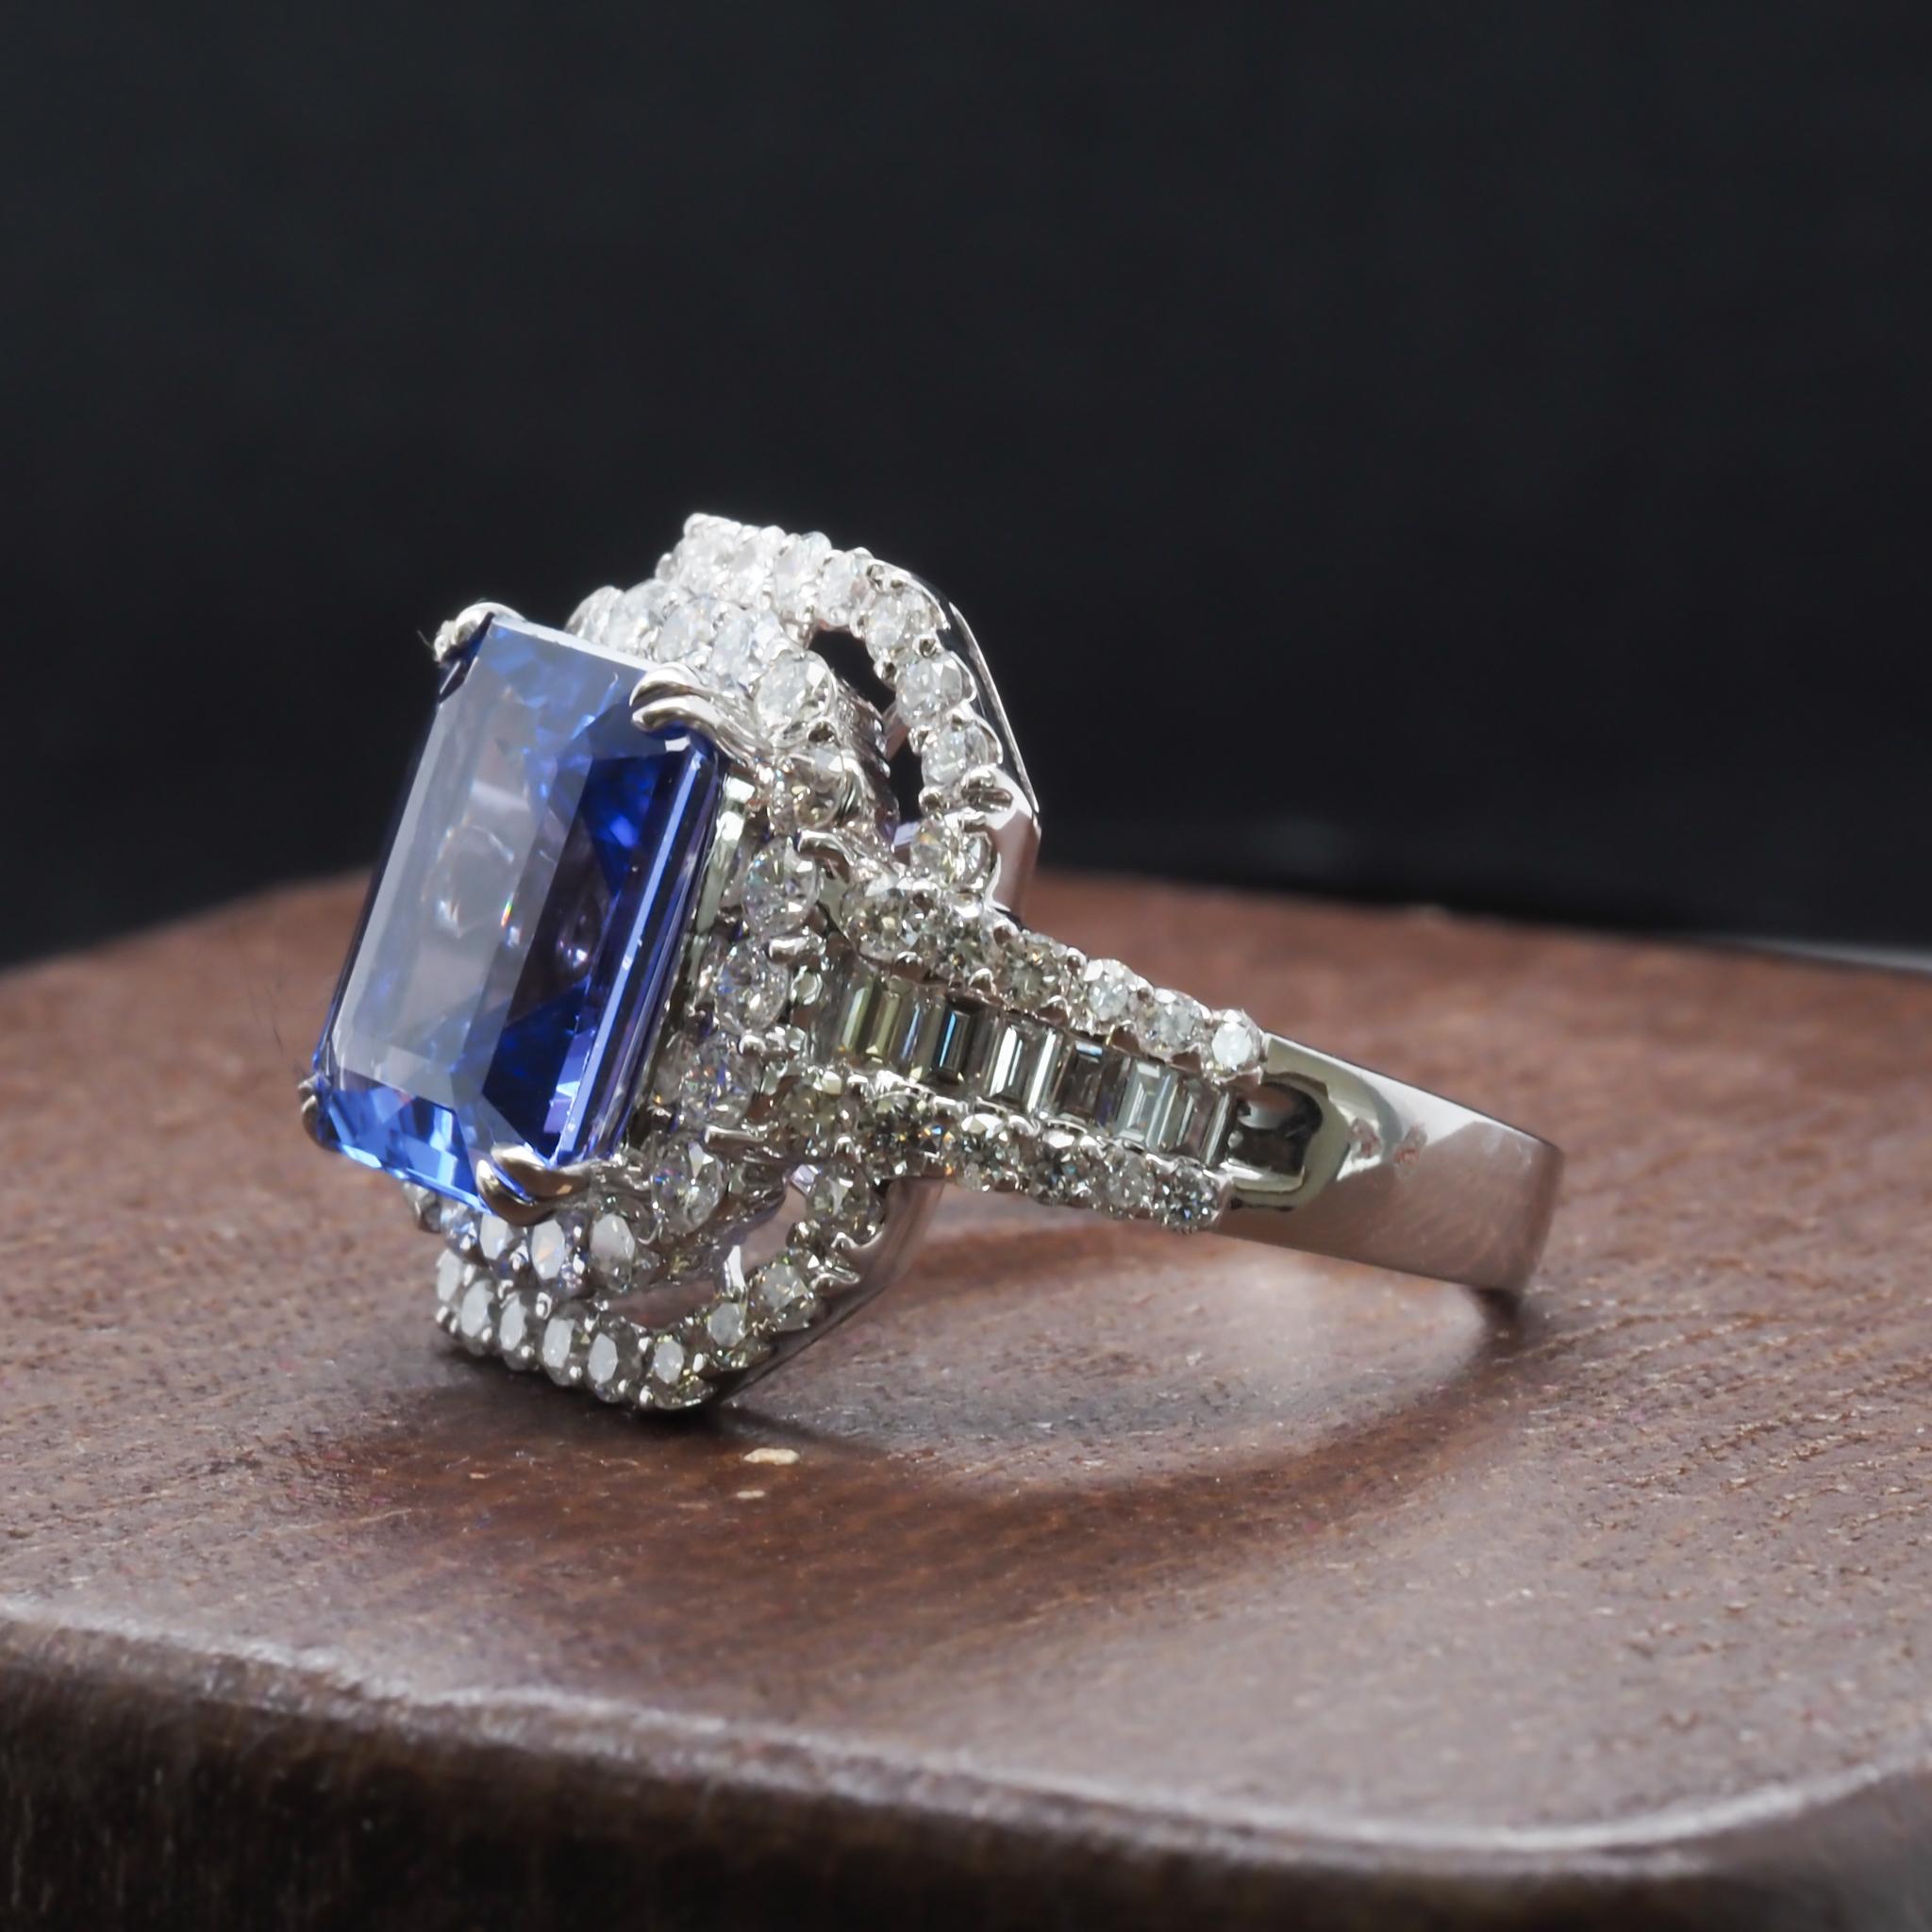 Year: 2000s
Item Details:
Metal Type: 18K White Gold [Hallmarked, and Tested]
Weight: 9.0 grams
Ring Size: 8
Center Tanzanite Details:
GIA Report# : 6224950708
Weight: 6.00ct
Cut: Rectangular Step Cut
Color: Blue-Violet
Side Diamond Details:
Weight: